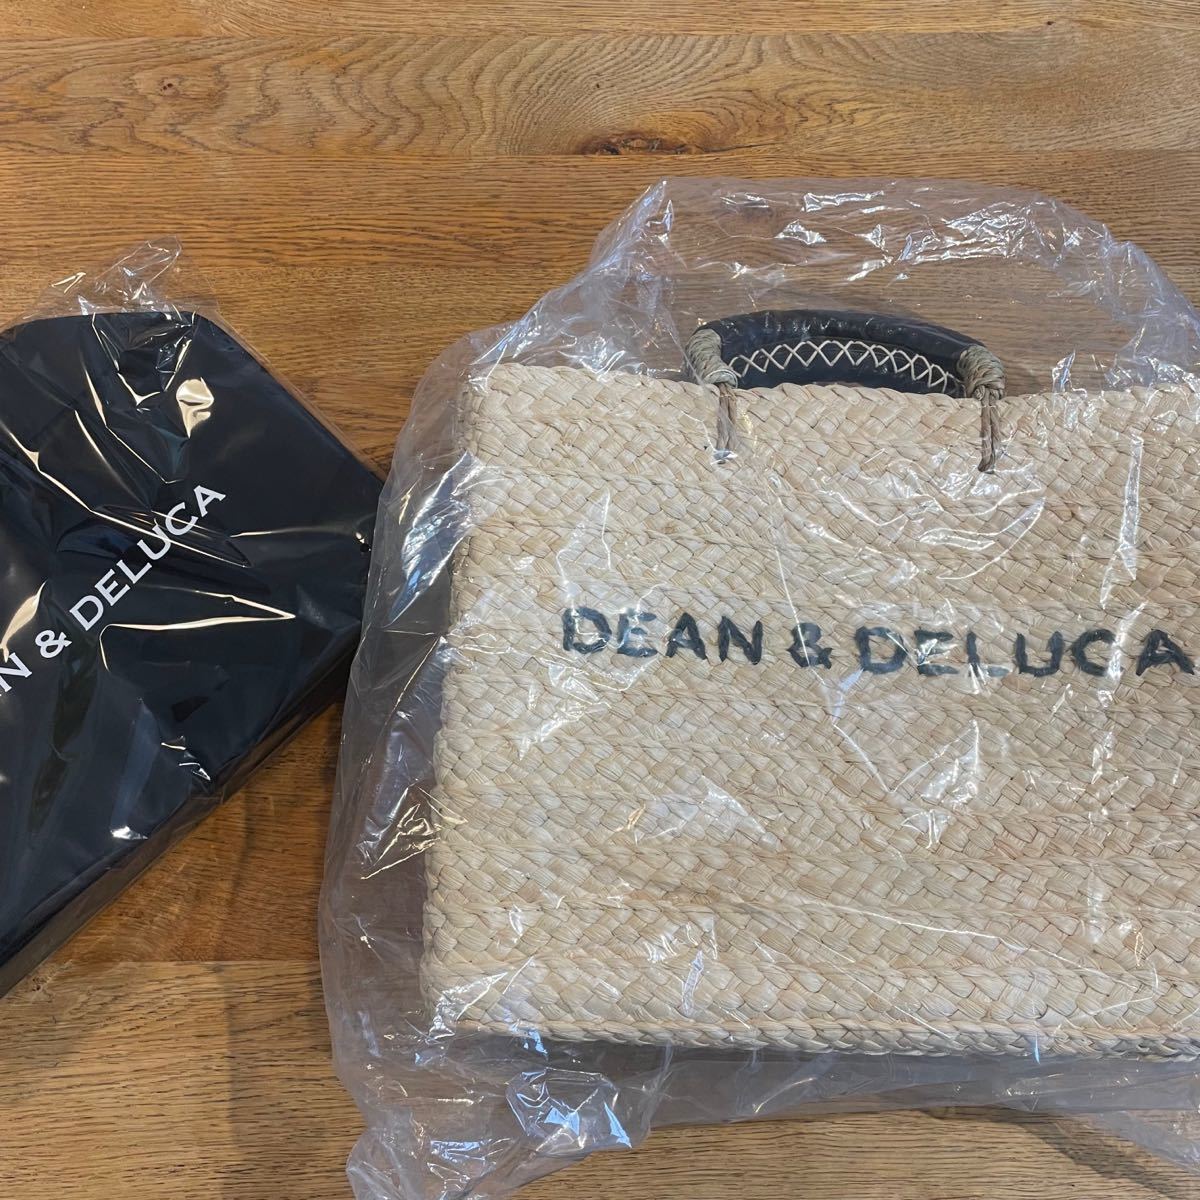 DEAN＆DELUCA×BEAMS COUTURE 保冷カゴバッグ かごバッグ バッグ レディース 秋冬定番